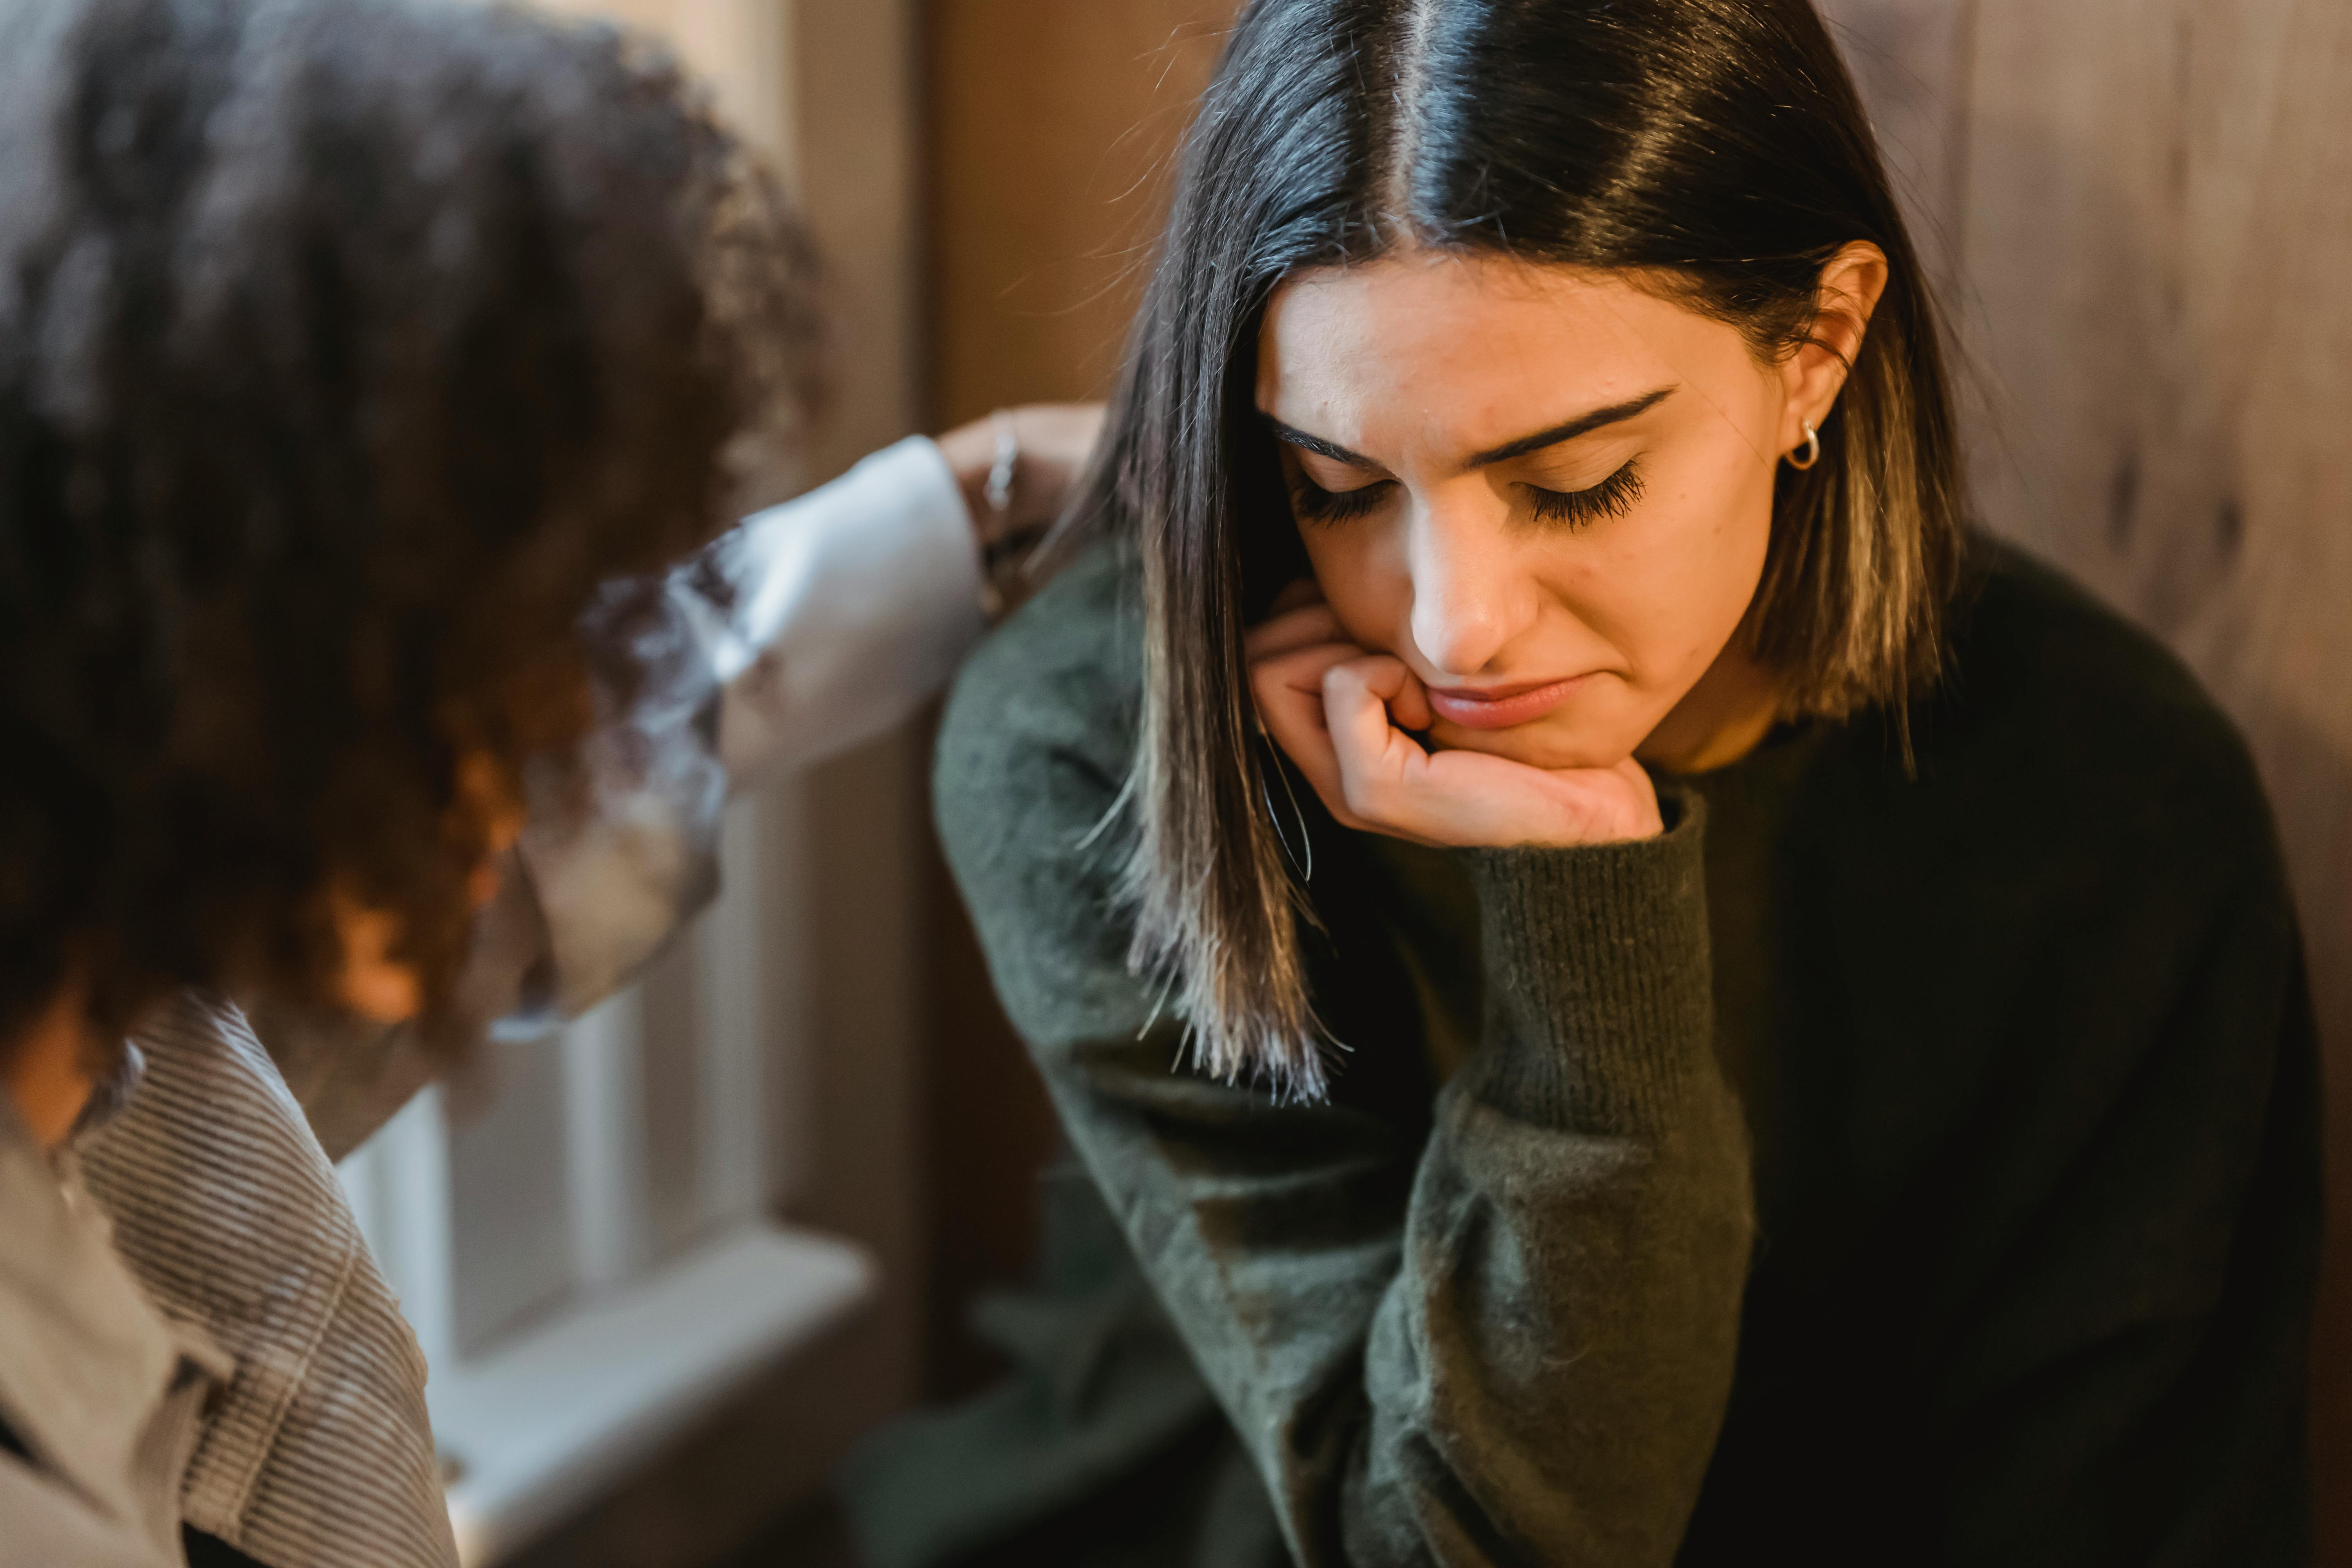 A sad woman being comforted by another woman | Source: Pexels